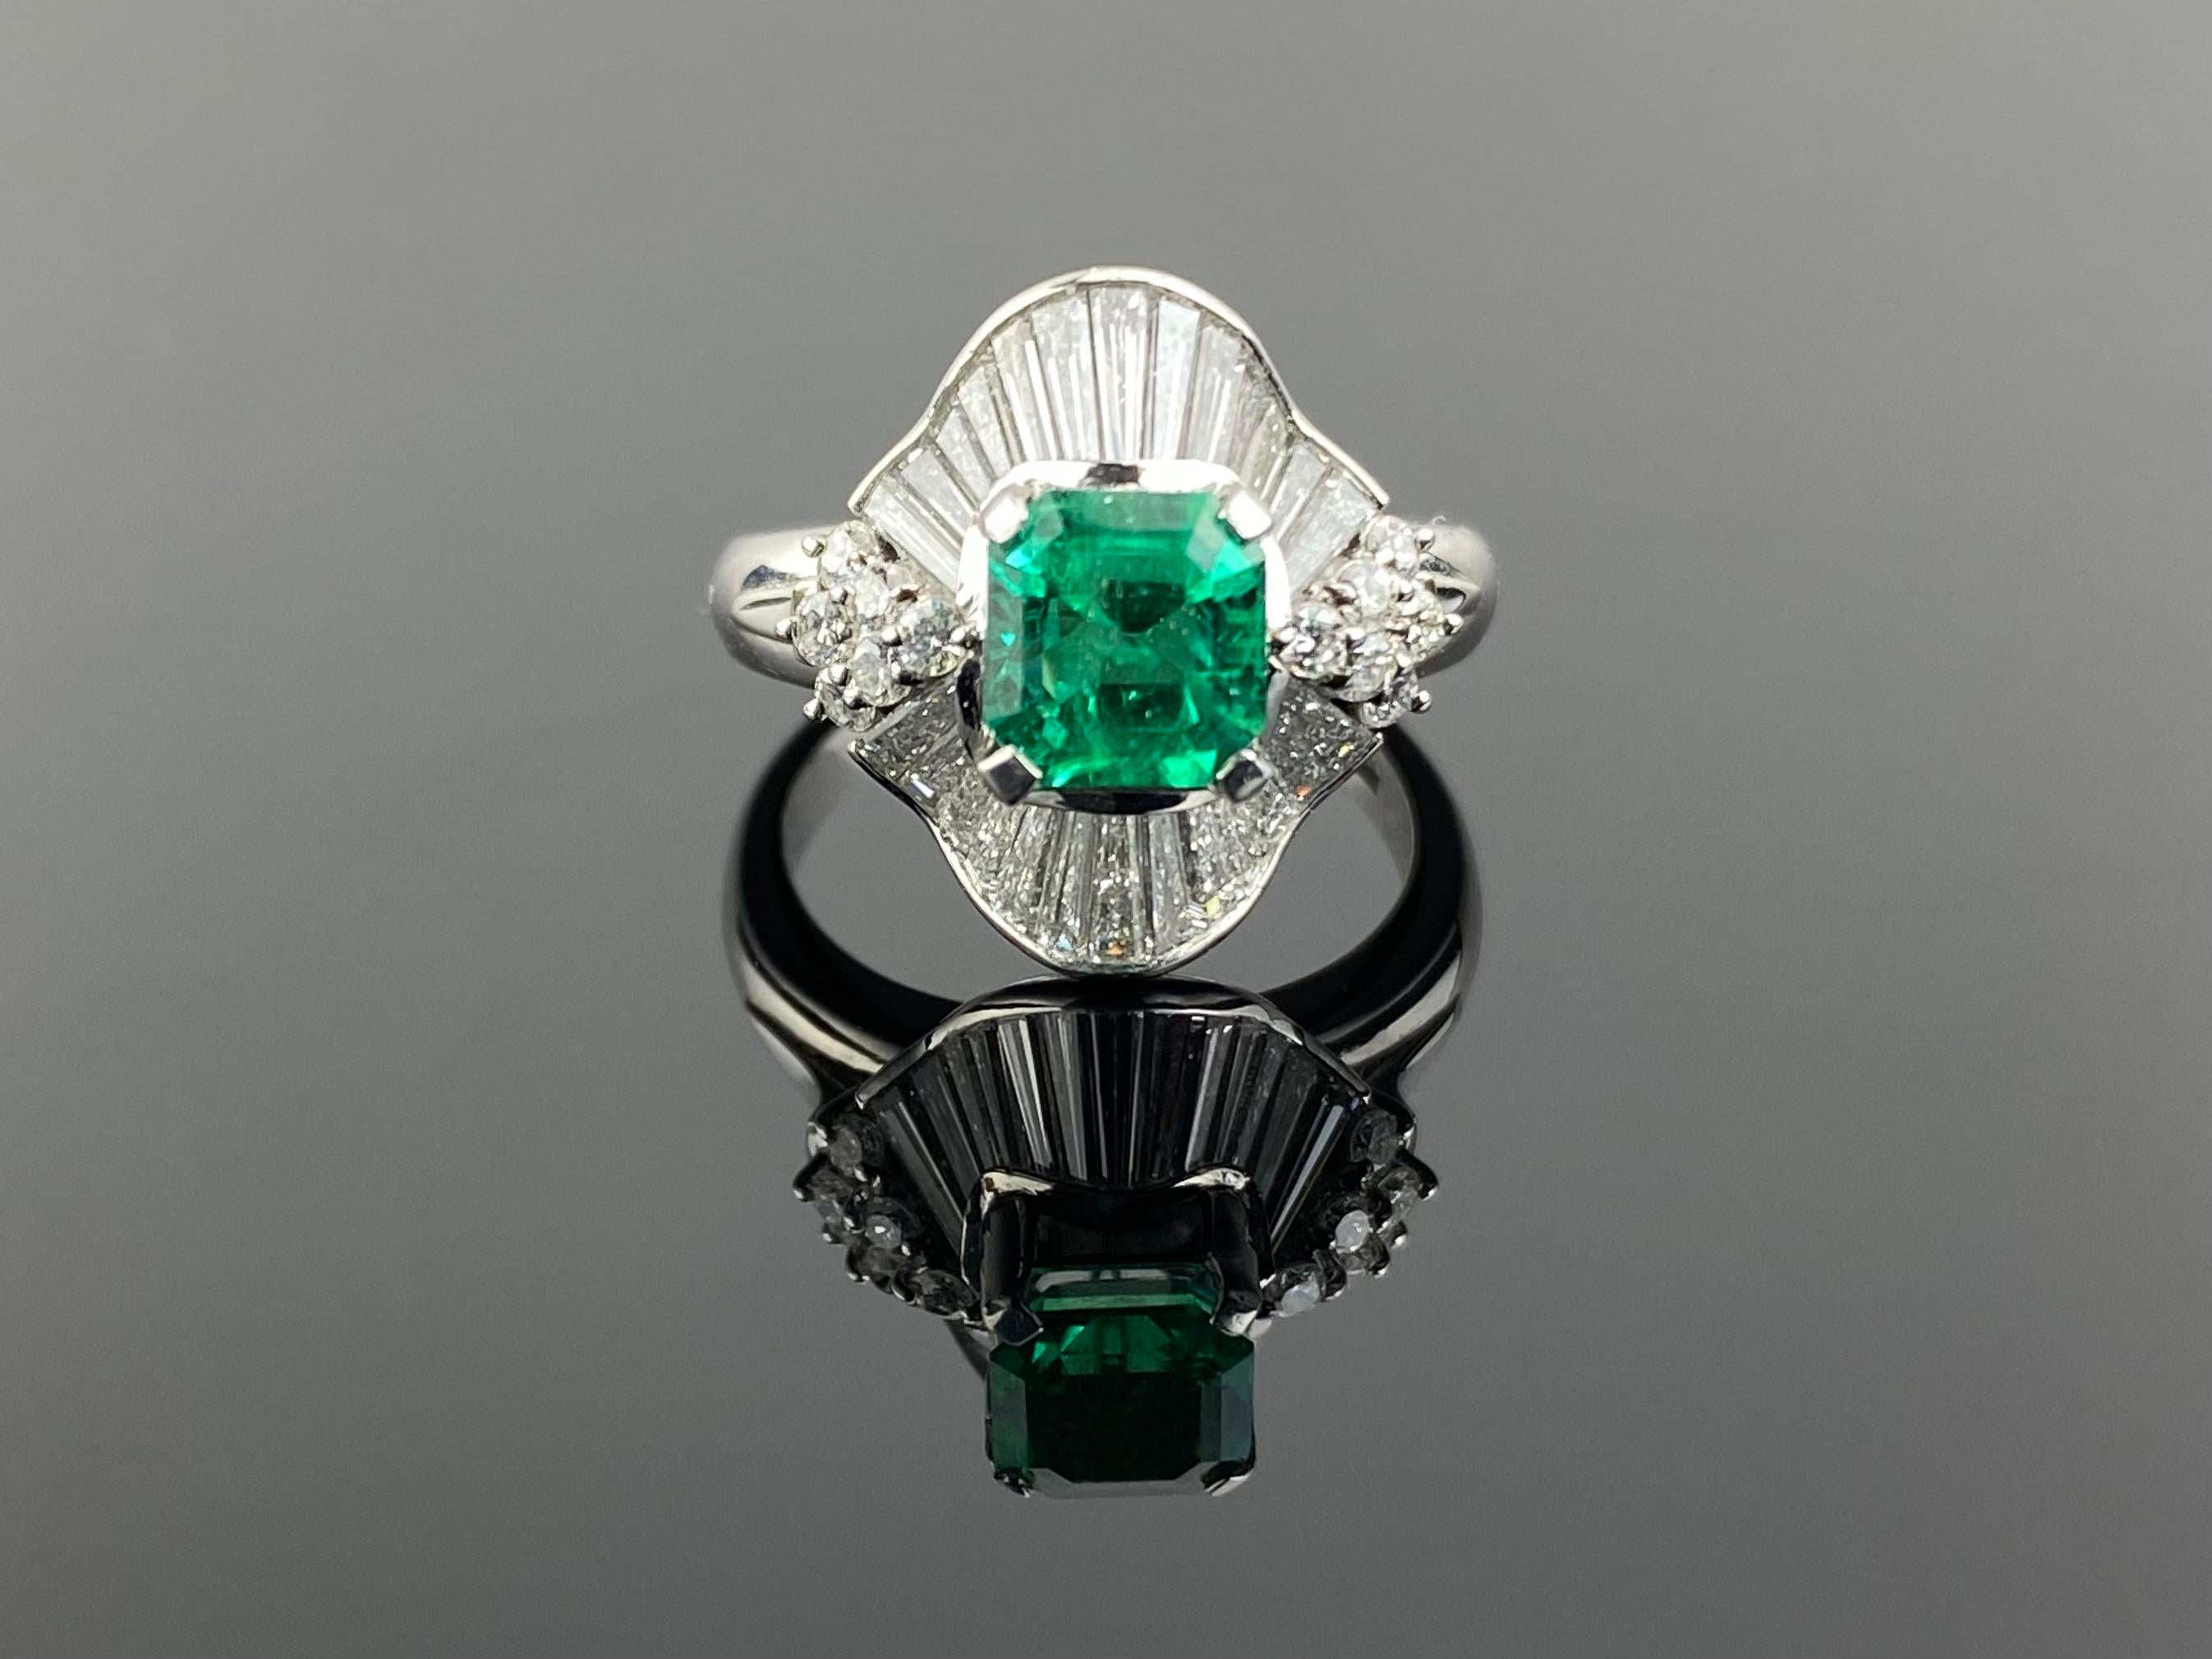 A classic, art-deco 1.18 carat Colombian Emerald and 1.34 carat Diamond baguette ring, set in platinum. The center stone has an ideal vivid green color, and a great shine/luster to it. The Emerald is transparent, and is of a very high quality. The